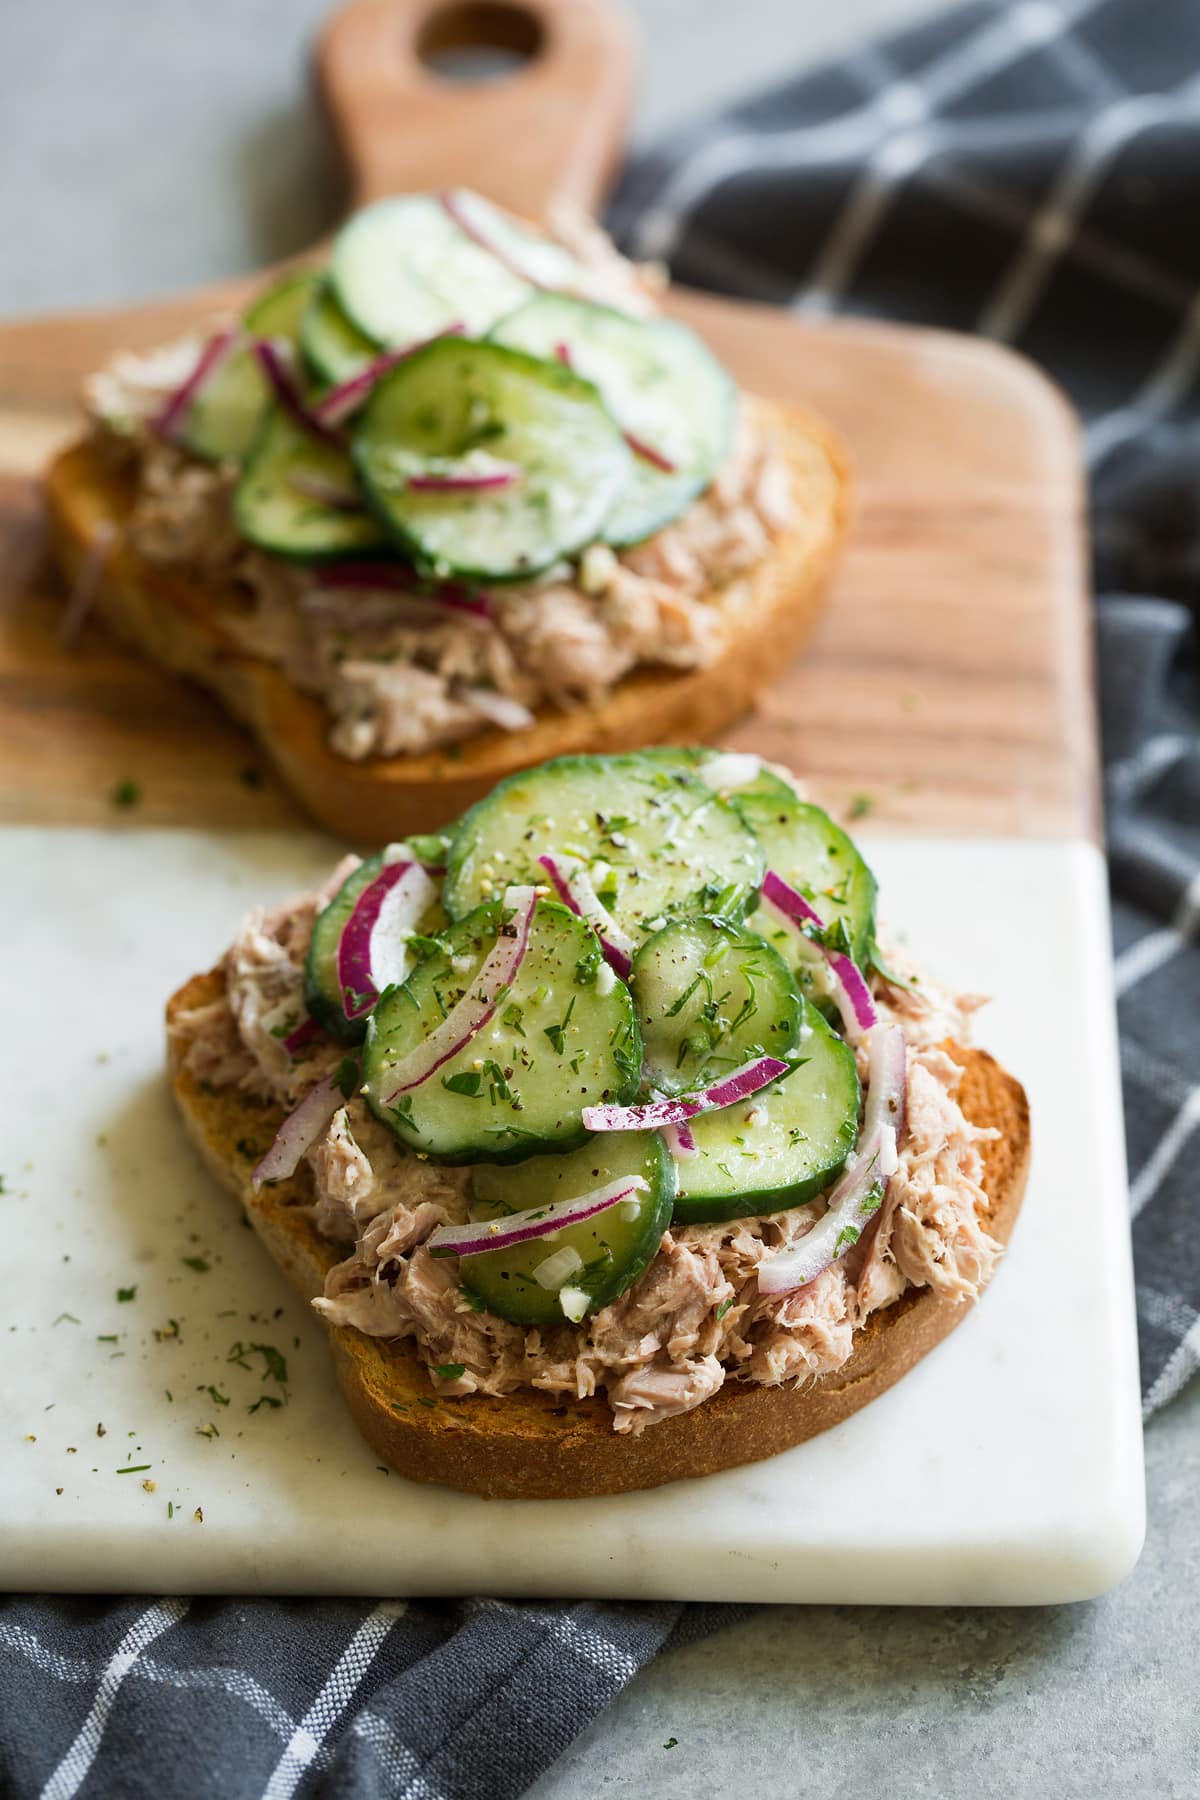 Cucumber salad served on top of an open faced tuna salad sandwich. Served with a side of potato chips. This is a serving suggestion.